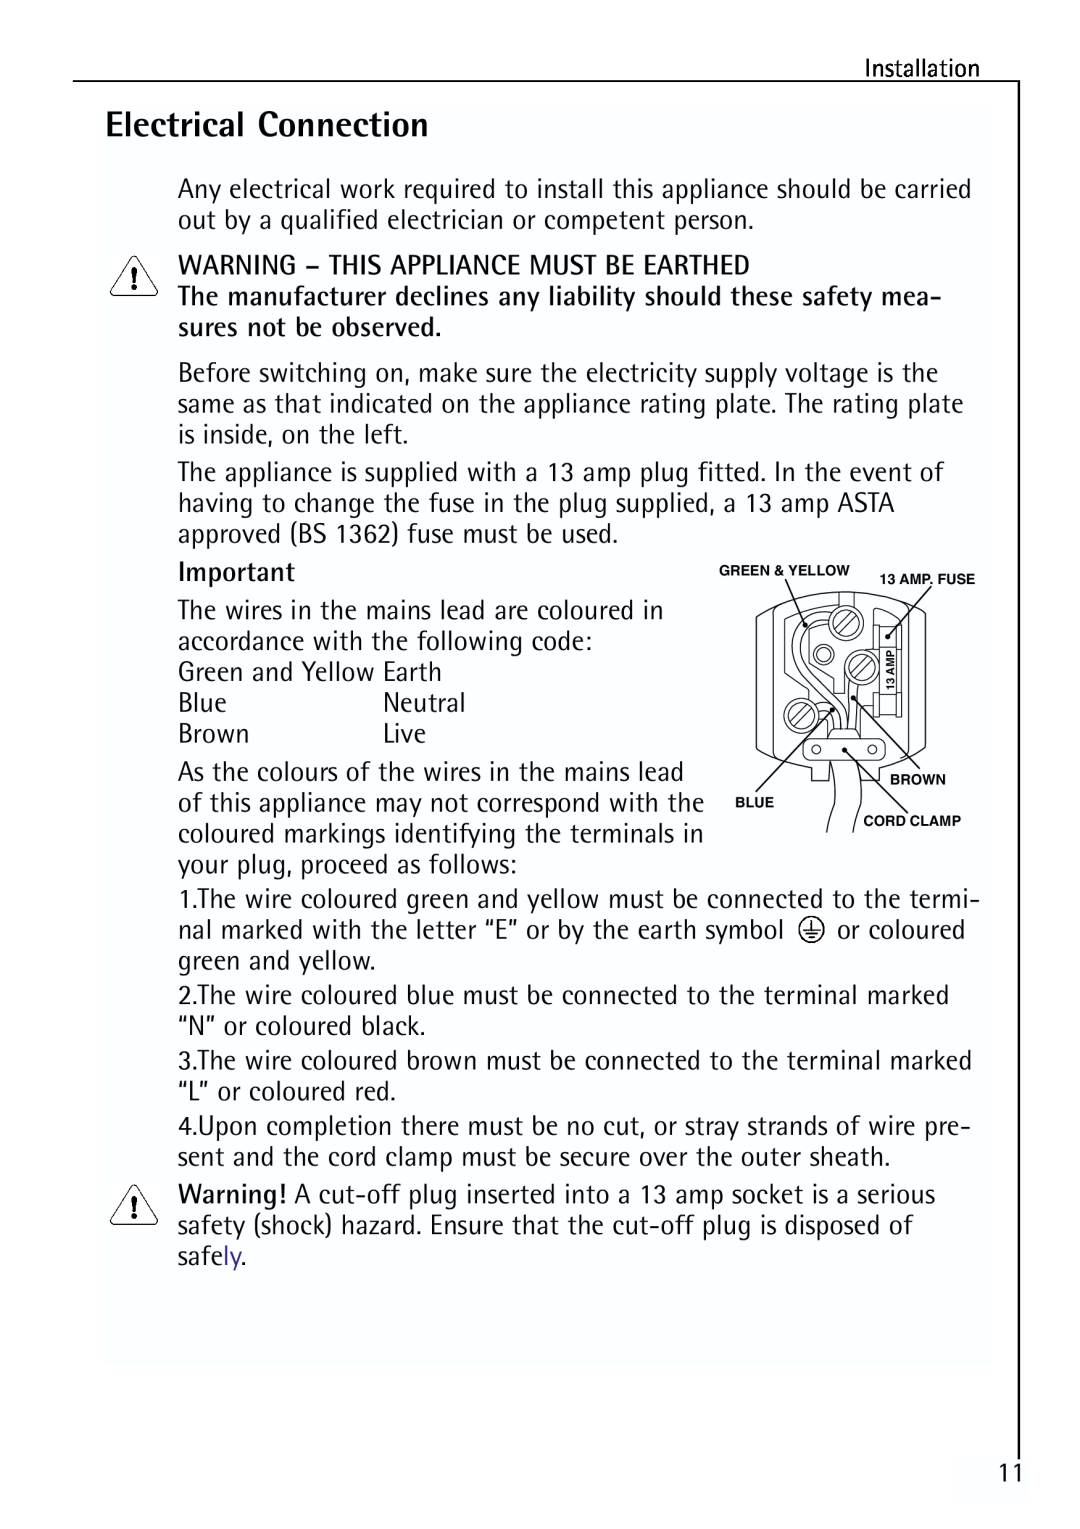 Electrolux 64150 TK manual Electrical Connection, Warning - This Appliance Must Be Earthed 